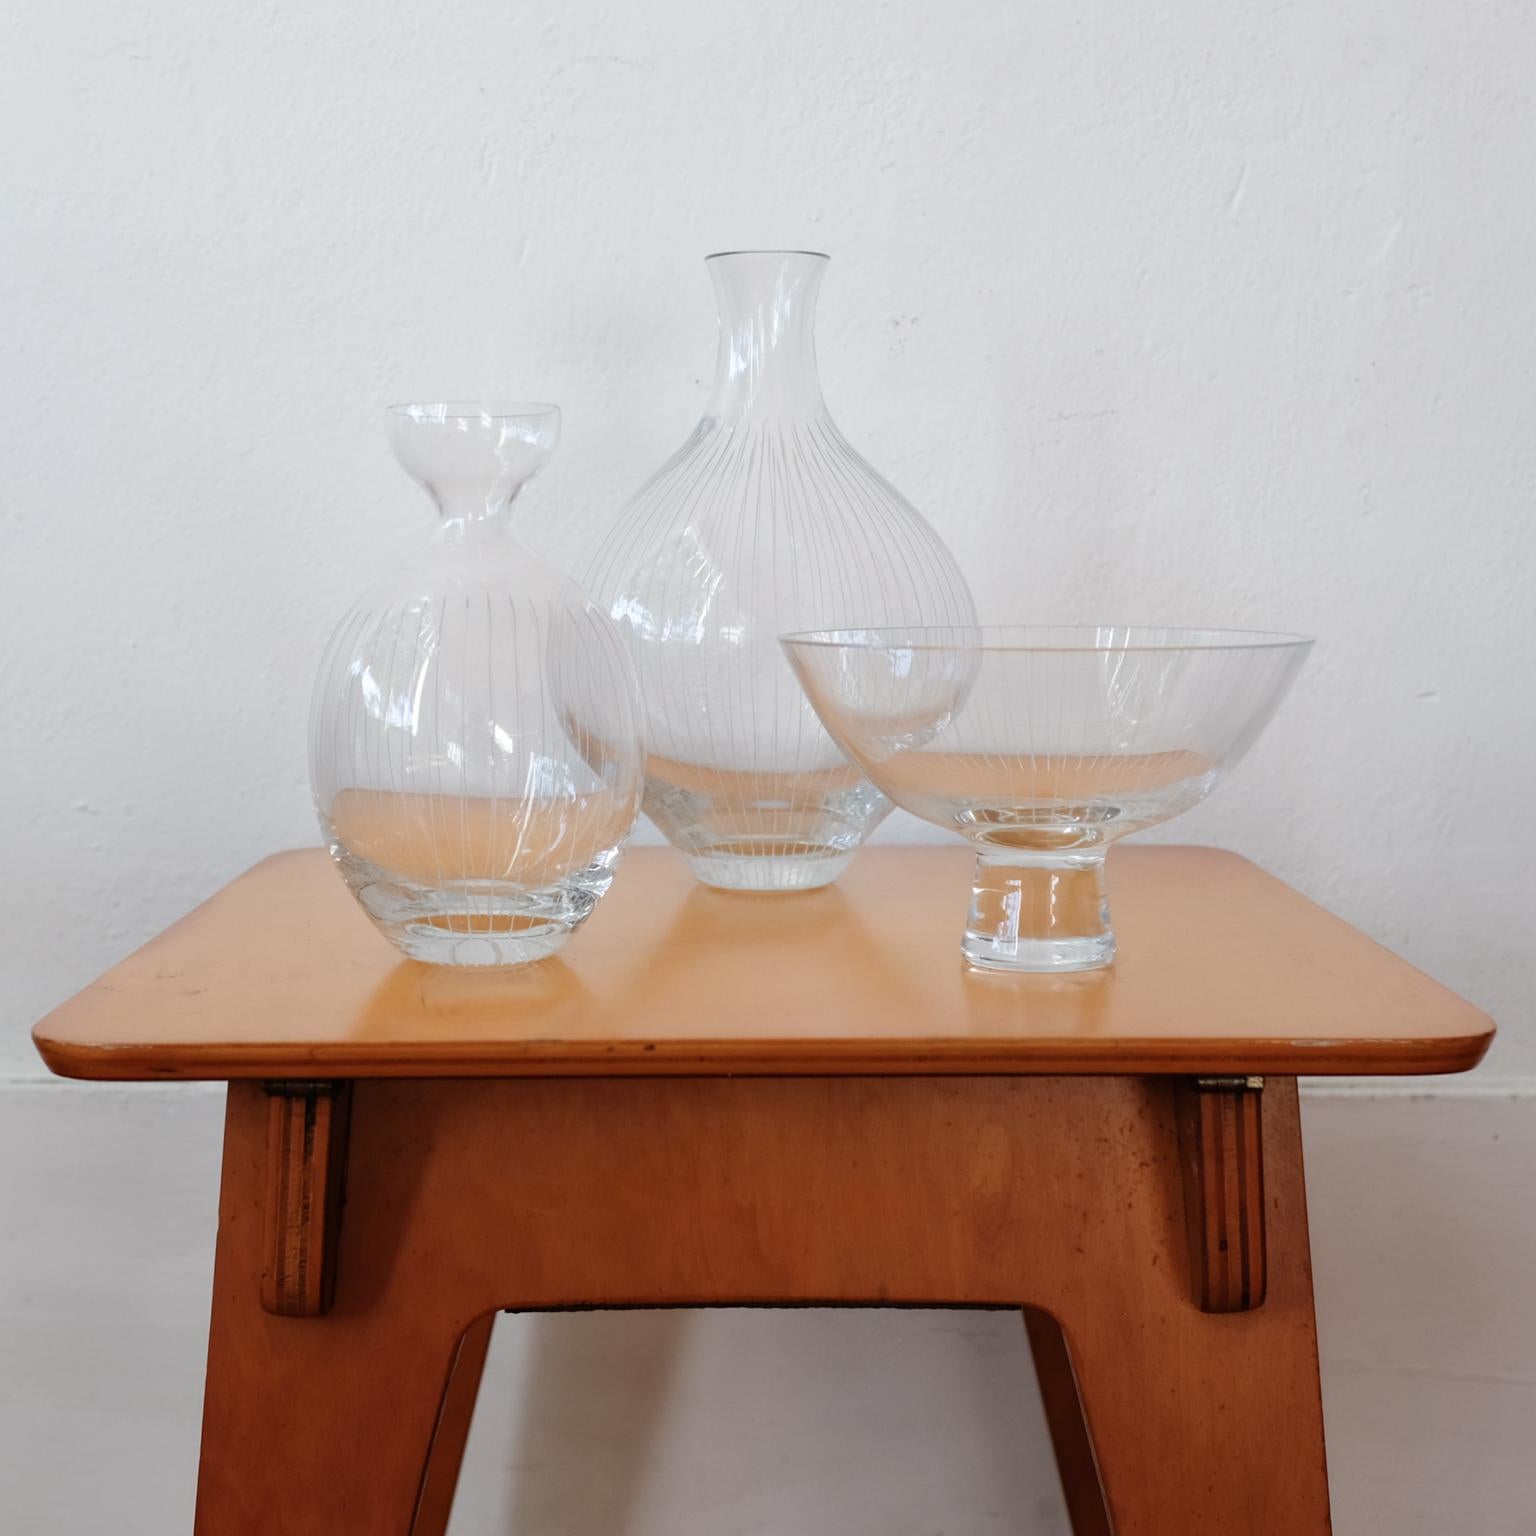 A set of three incised glass pieces by Harrison McIntosh (11 September 1914 -21 January 2016). Mostly known for ceramics, these glass pieces were designed after three of his most well-known forms and lined decoration. The bottle and compote forms